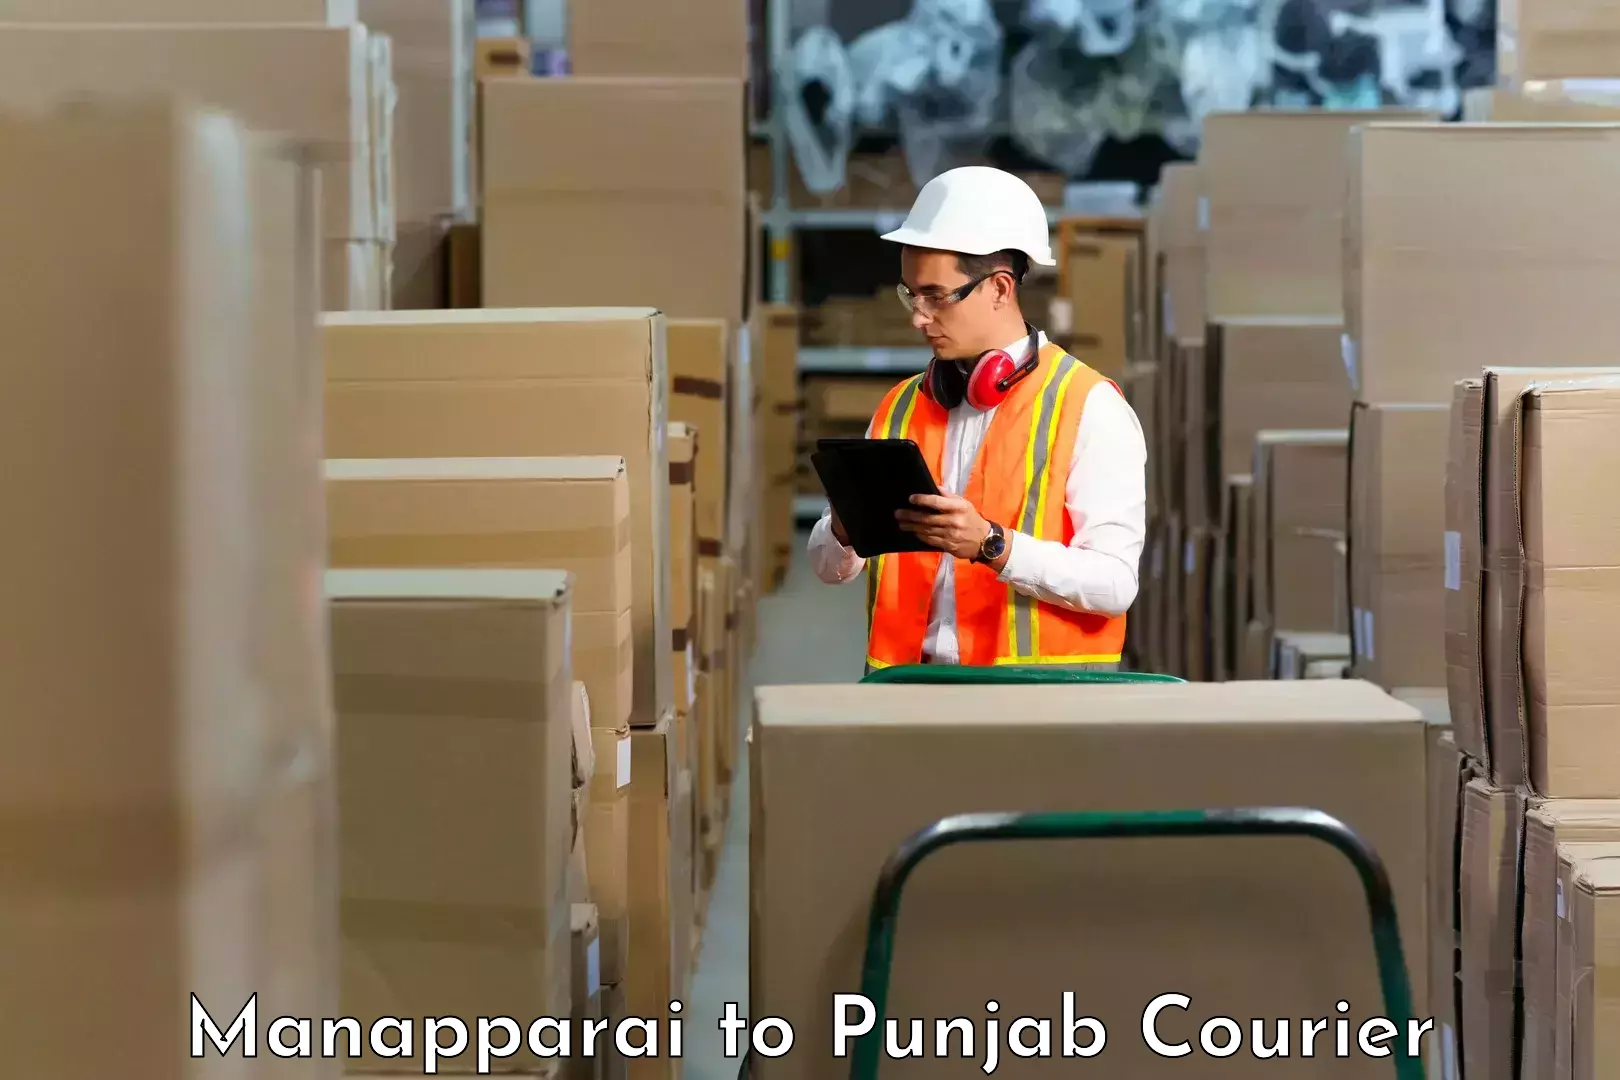 State-of-the-art courier technology Manapparai to Rajpura